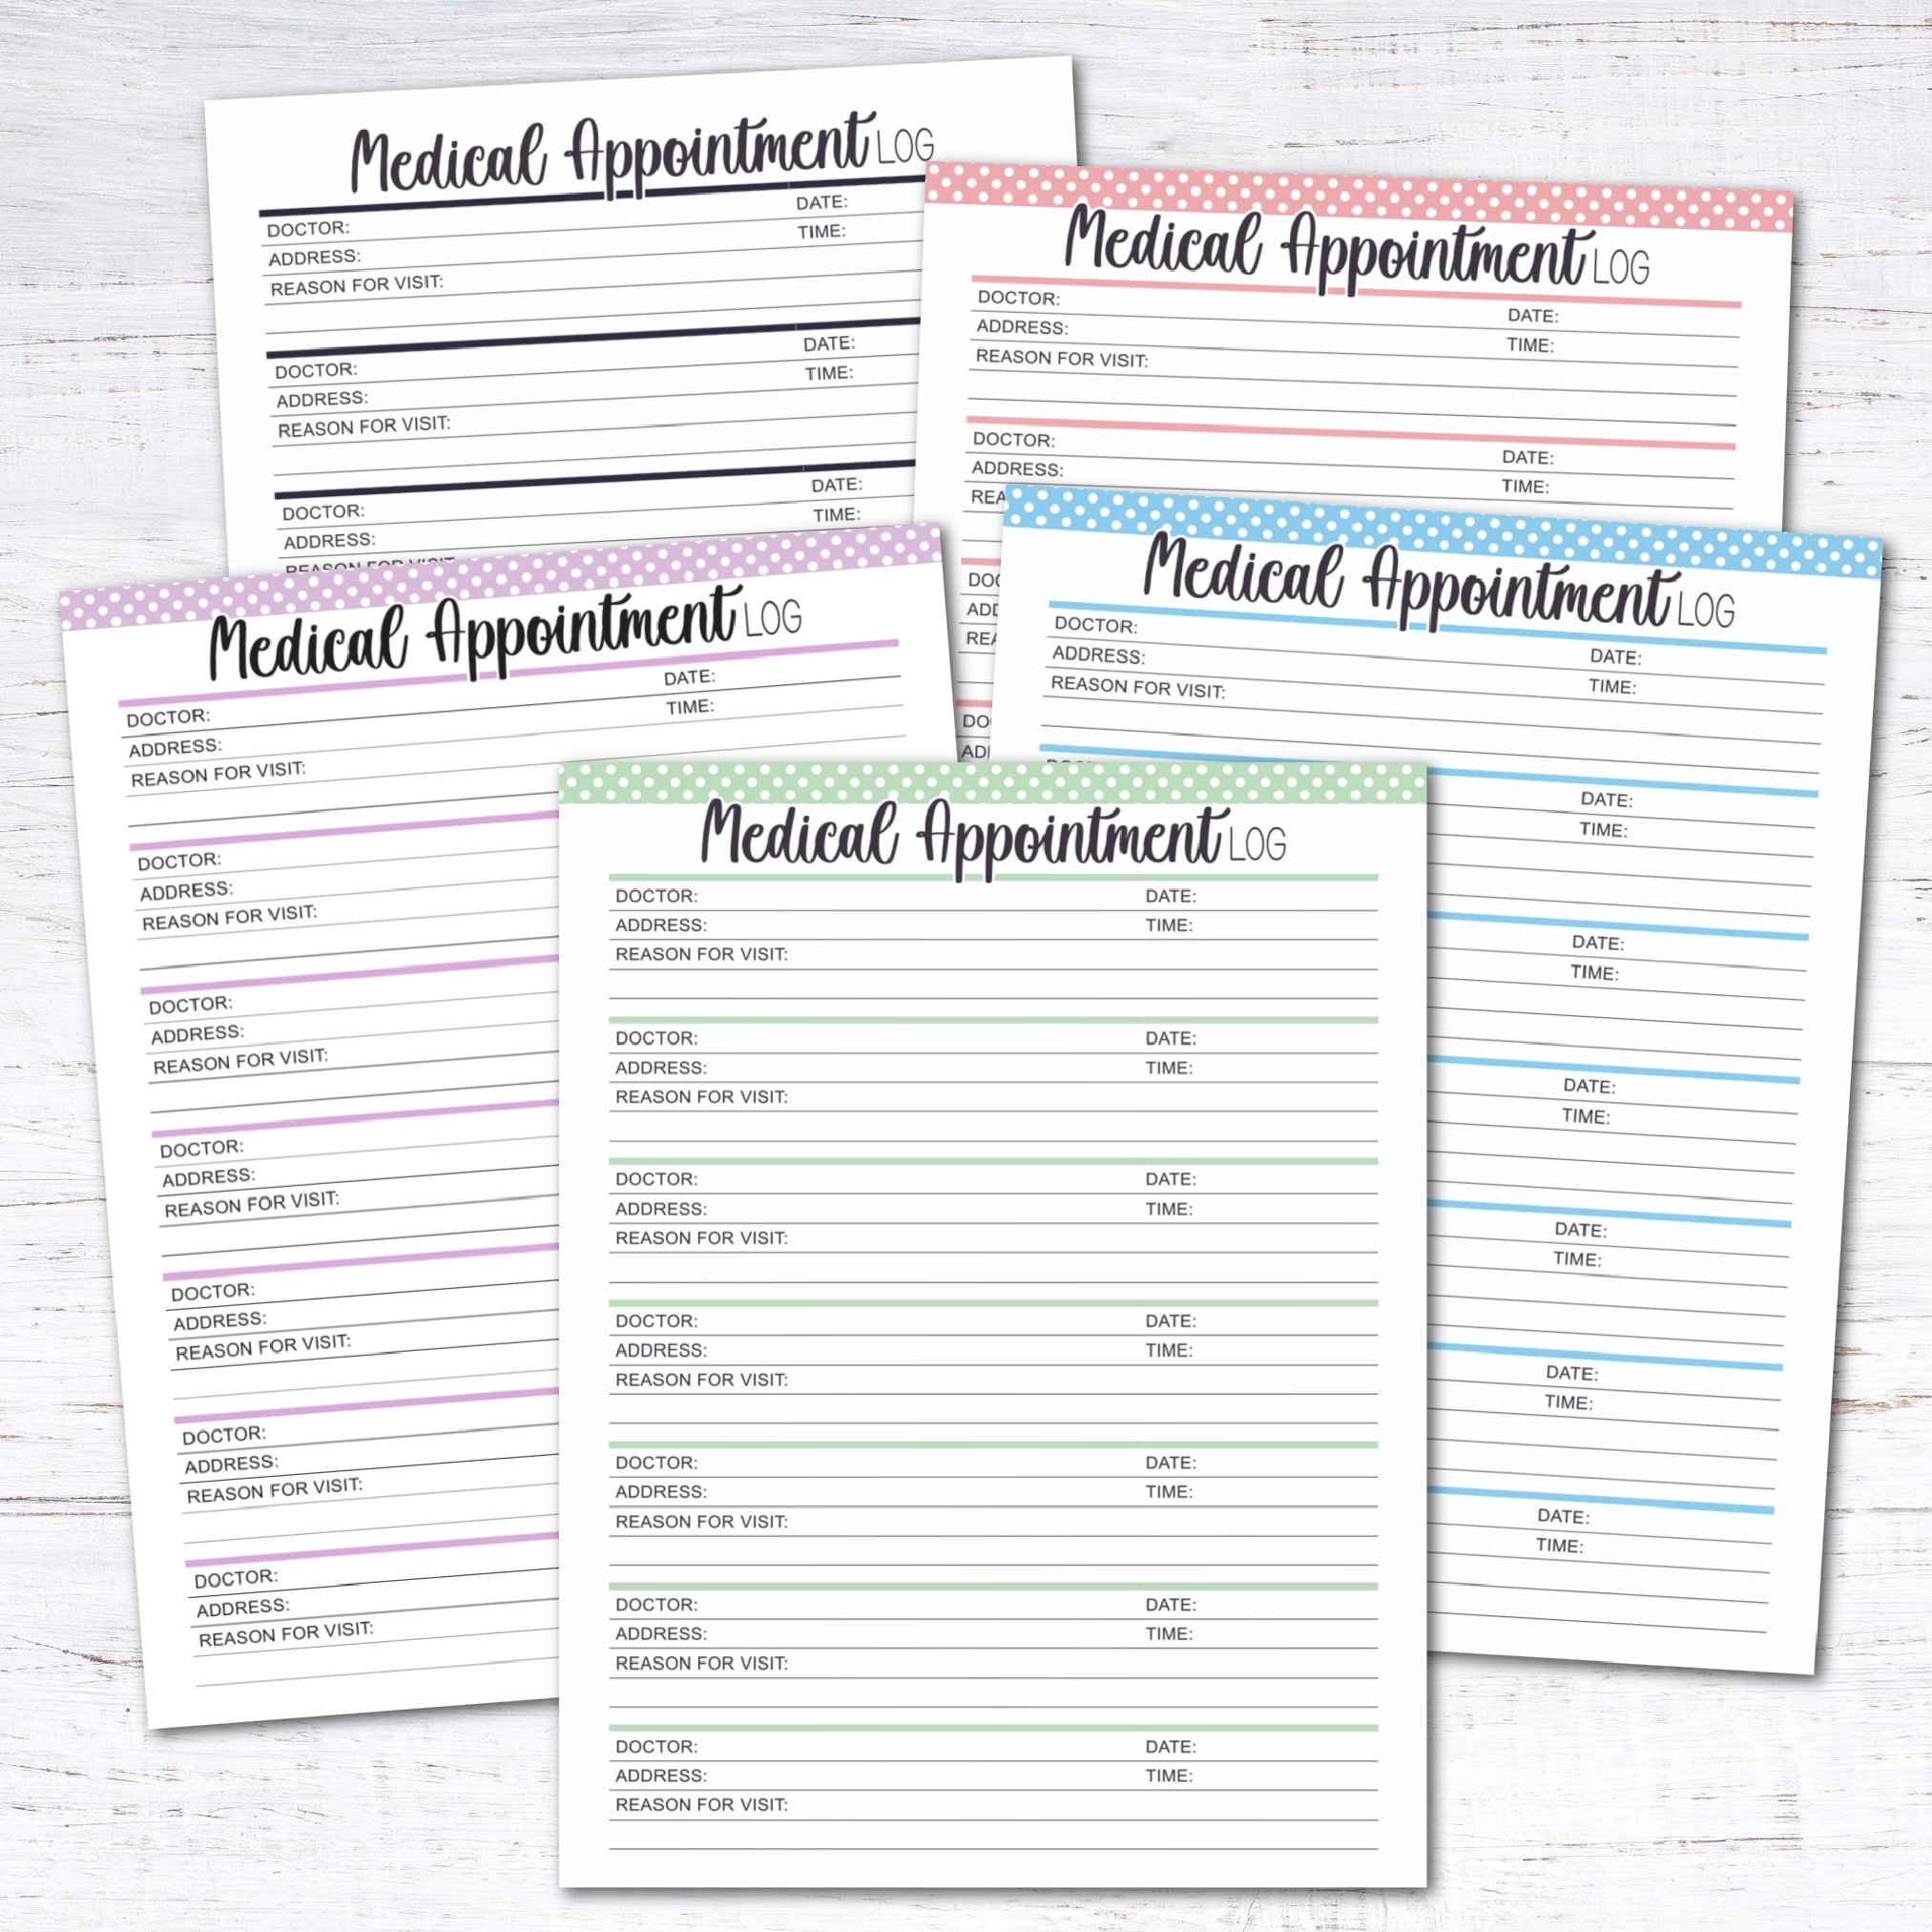 medical-appointment-log-free-printable-day-8-krafty-planner